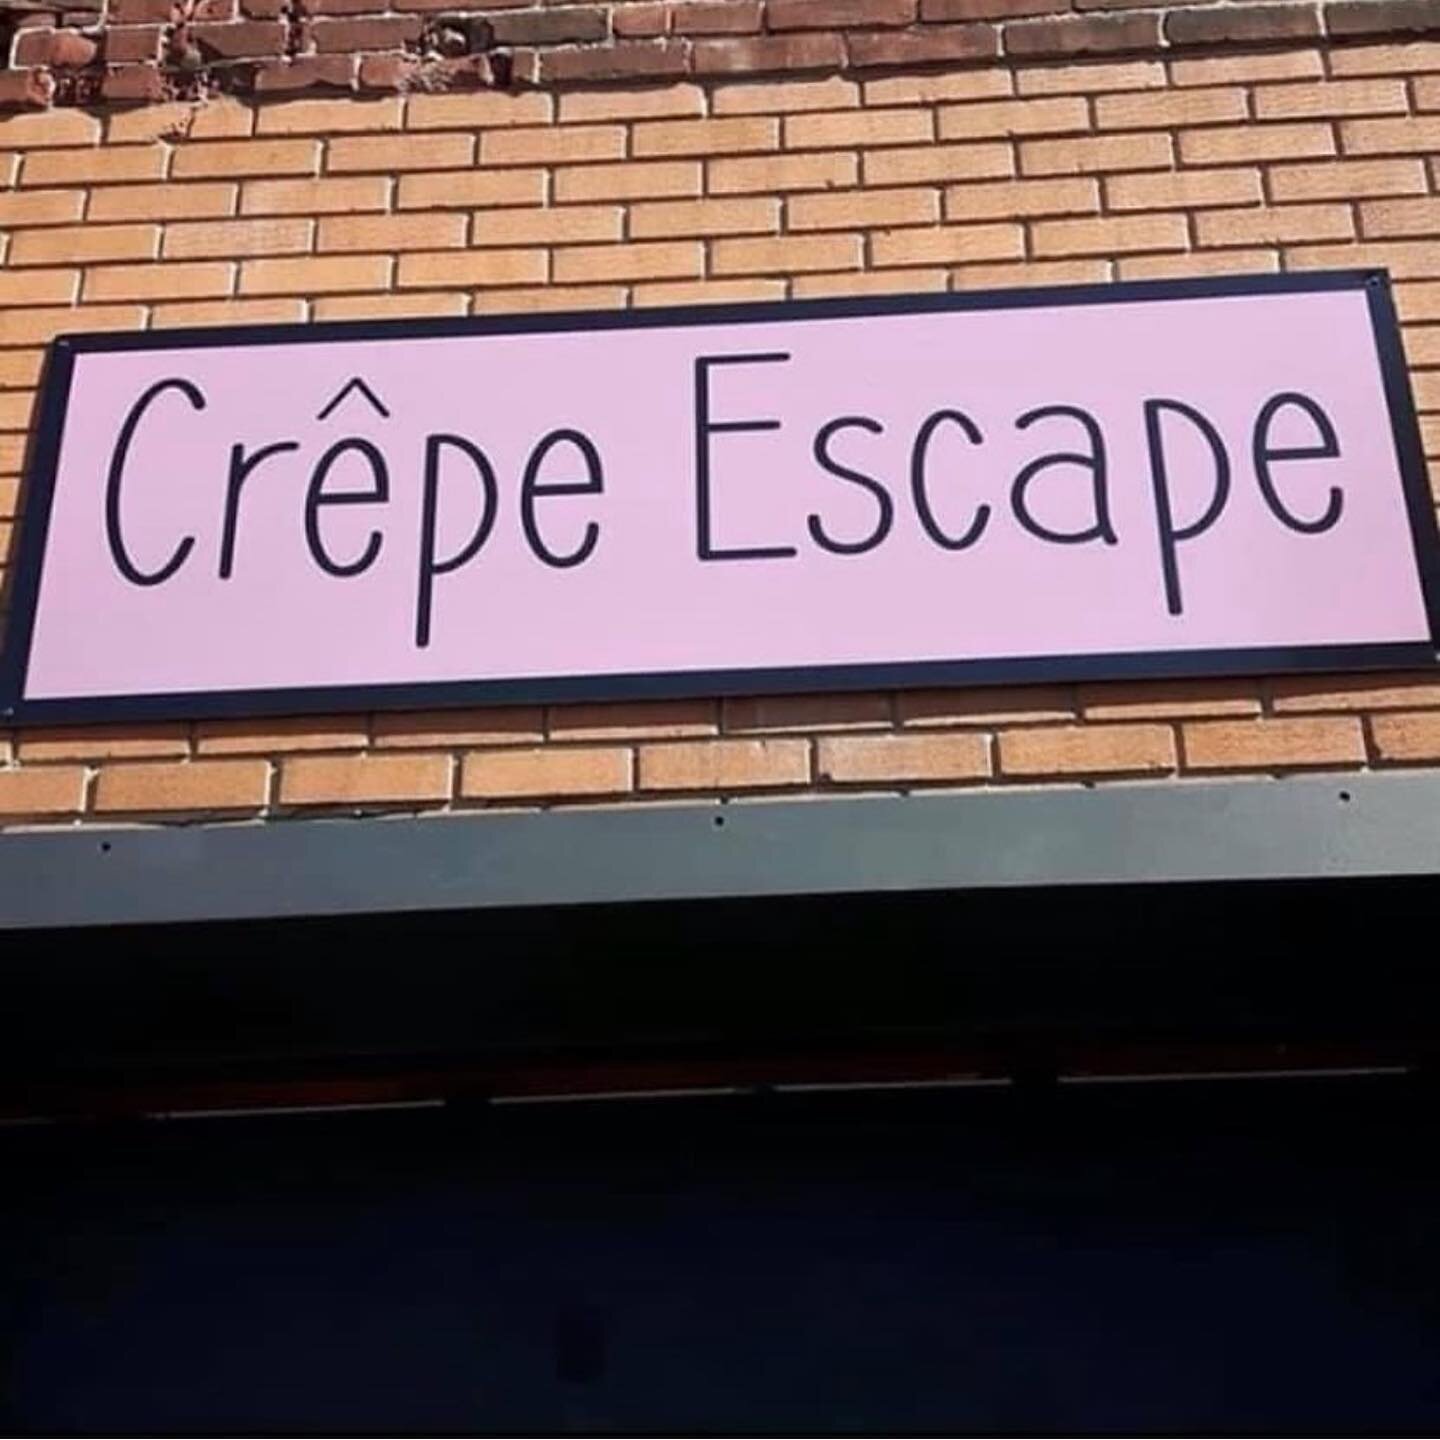 It&rsquo;s Crepe Escape&rsquo;s 5th Birthday 🥳 

We&rsquo;ve been so busy, we almost forgot to post! We can&rsquo;t thank you all enough for your support and good company throughout the years. 

Two brothers with a dream made into reality with the h